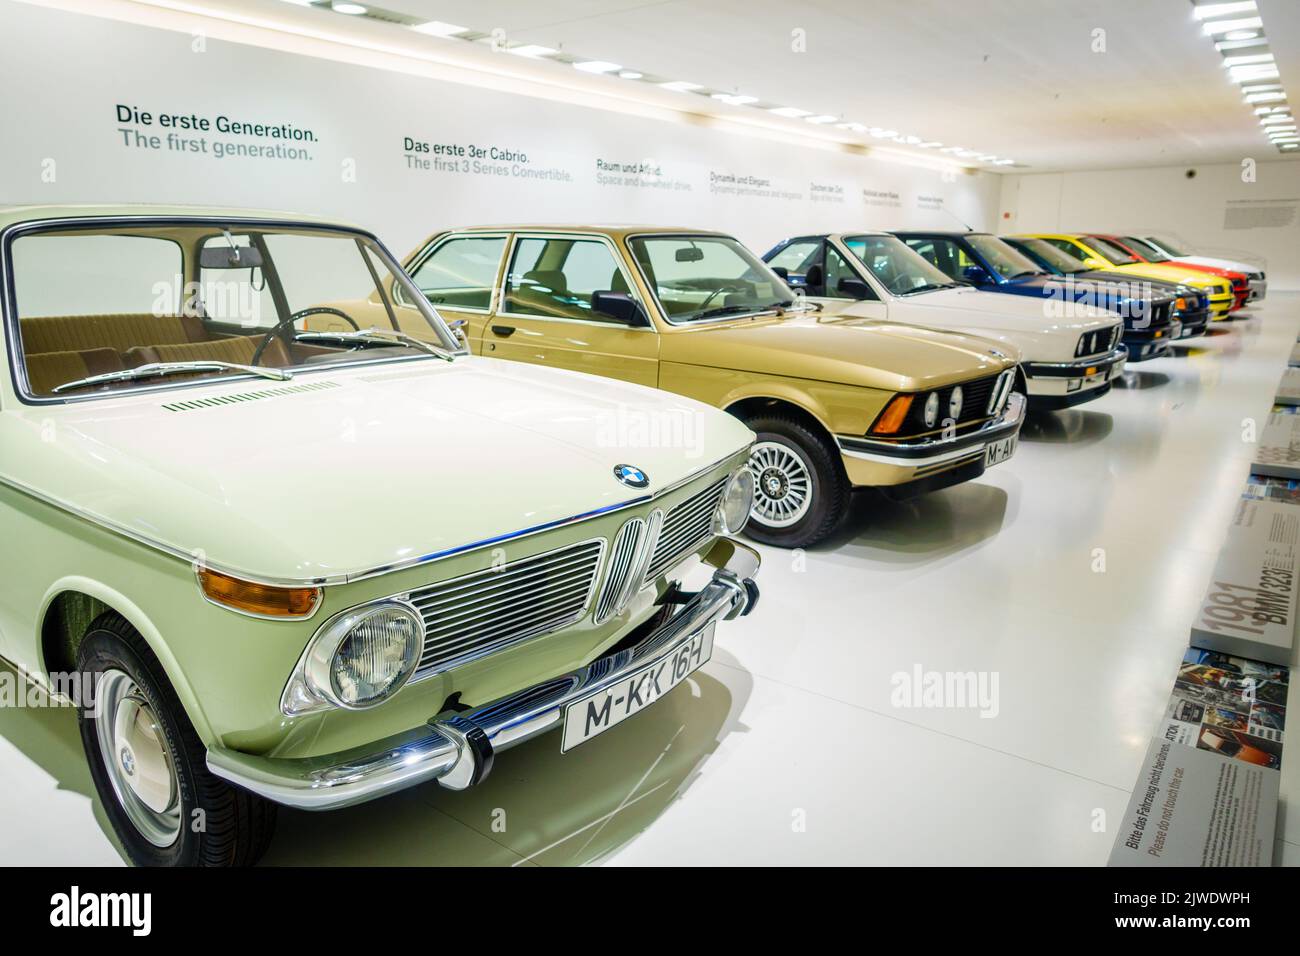 Munich, Germany, September 29, 2015: BMW 3-series cars at BMW Museum in Munich, Germany Stock Photo